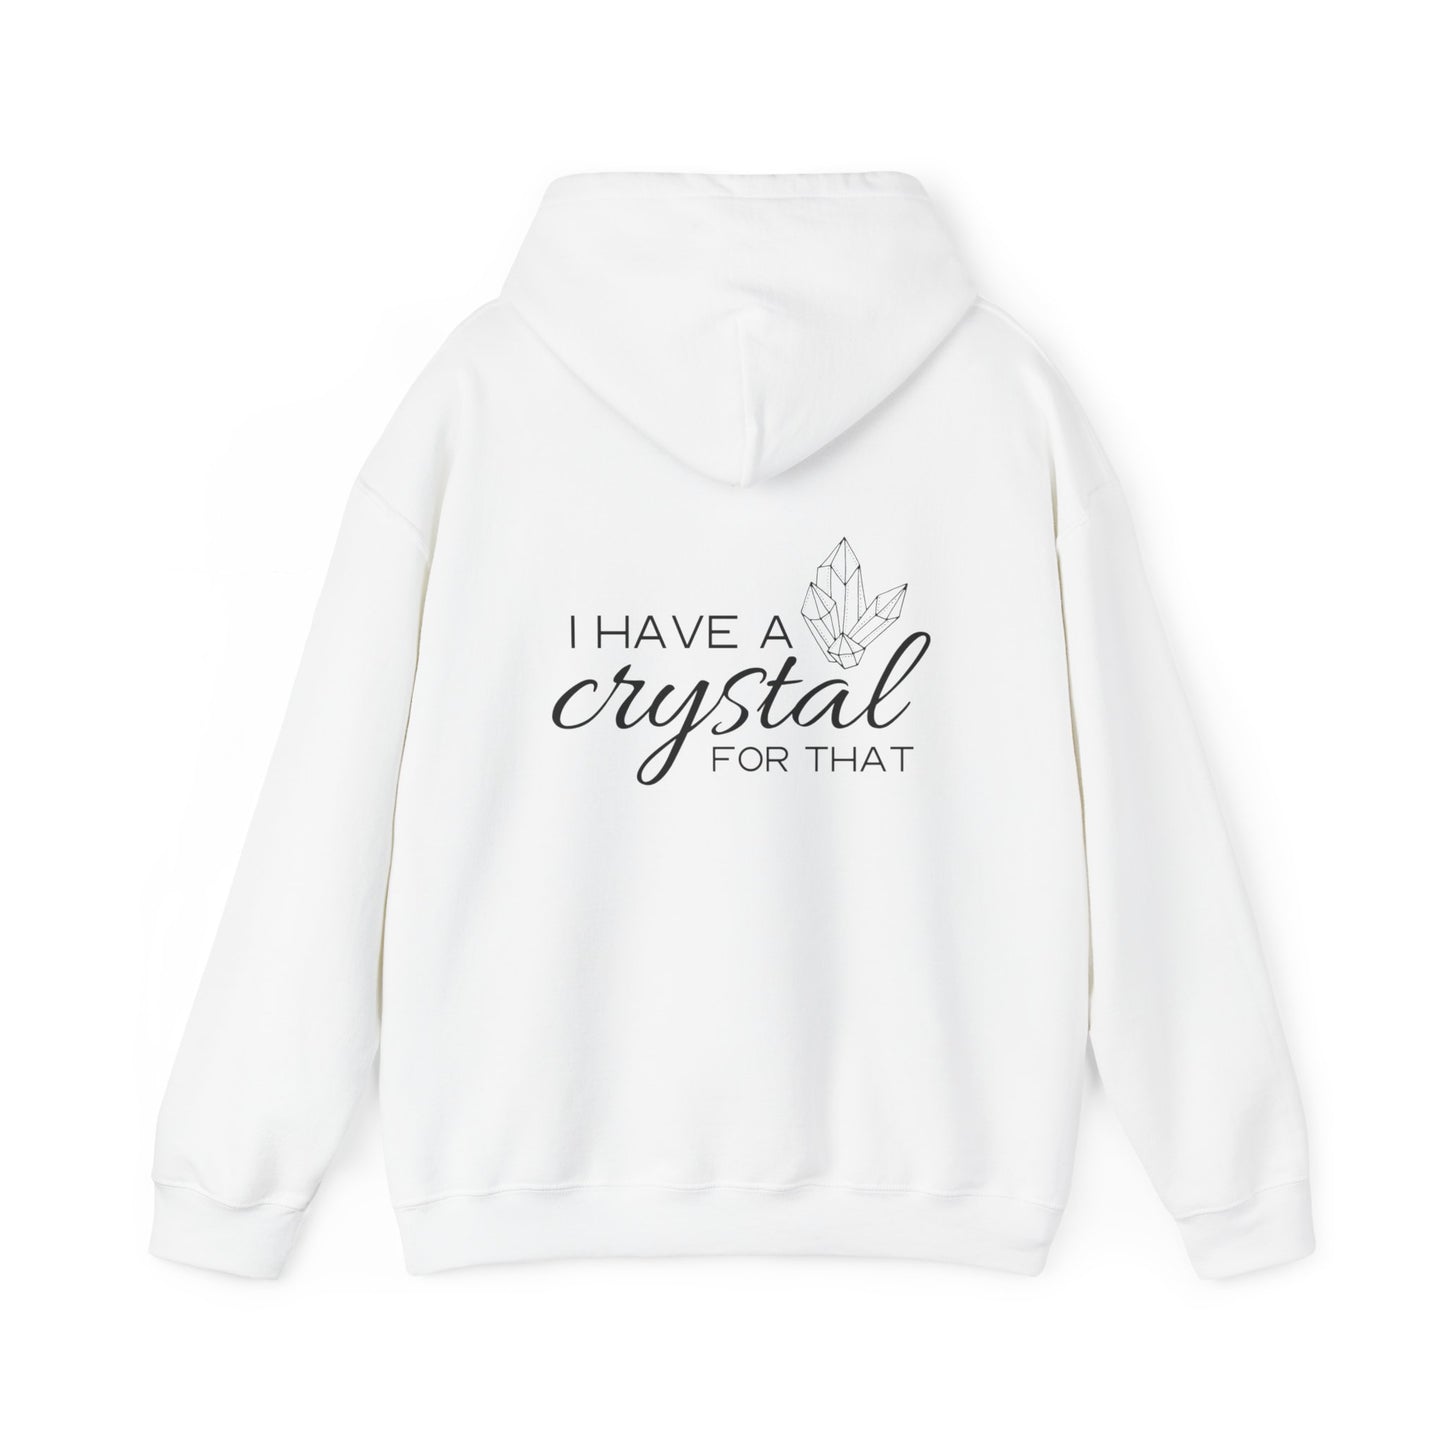 I have a crystal for that hoodie